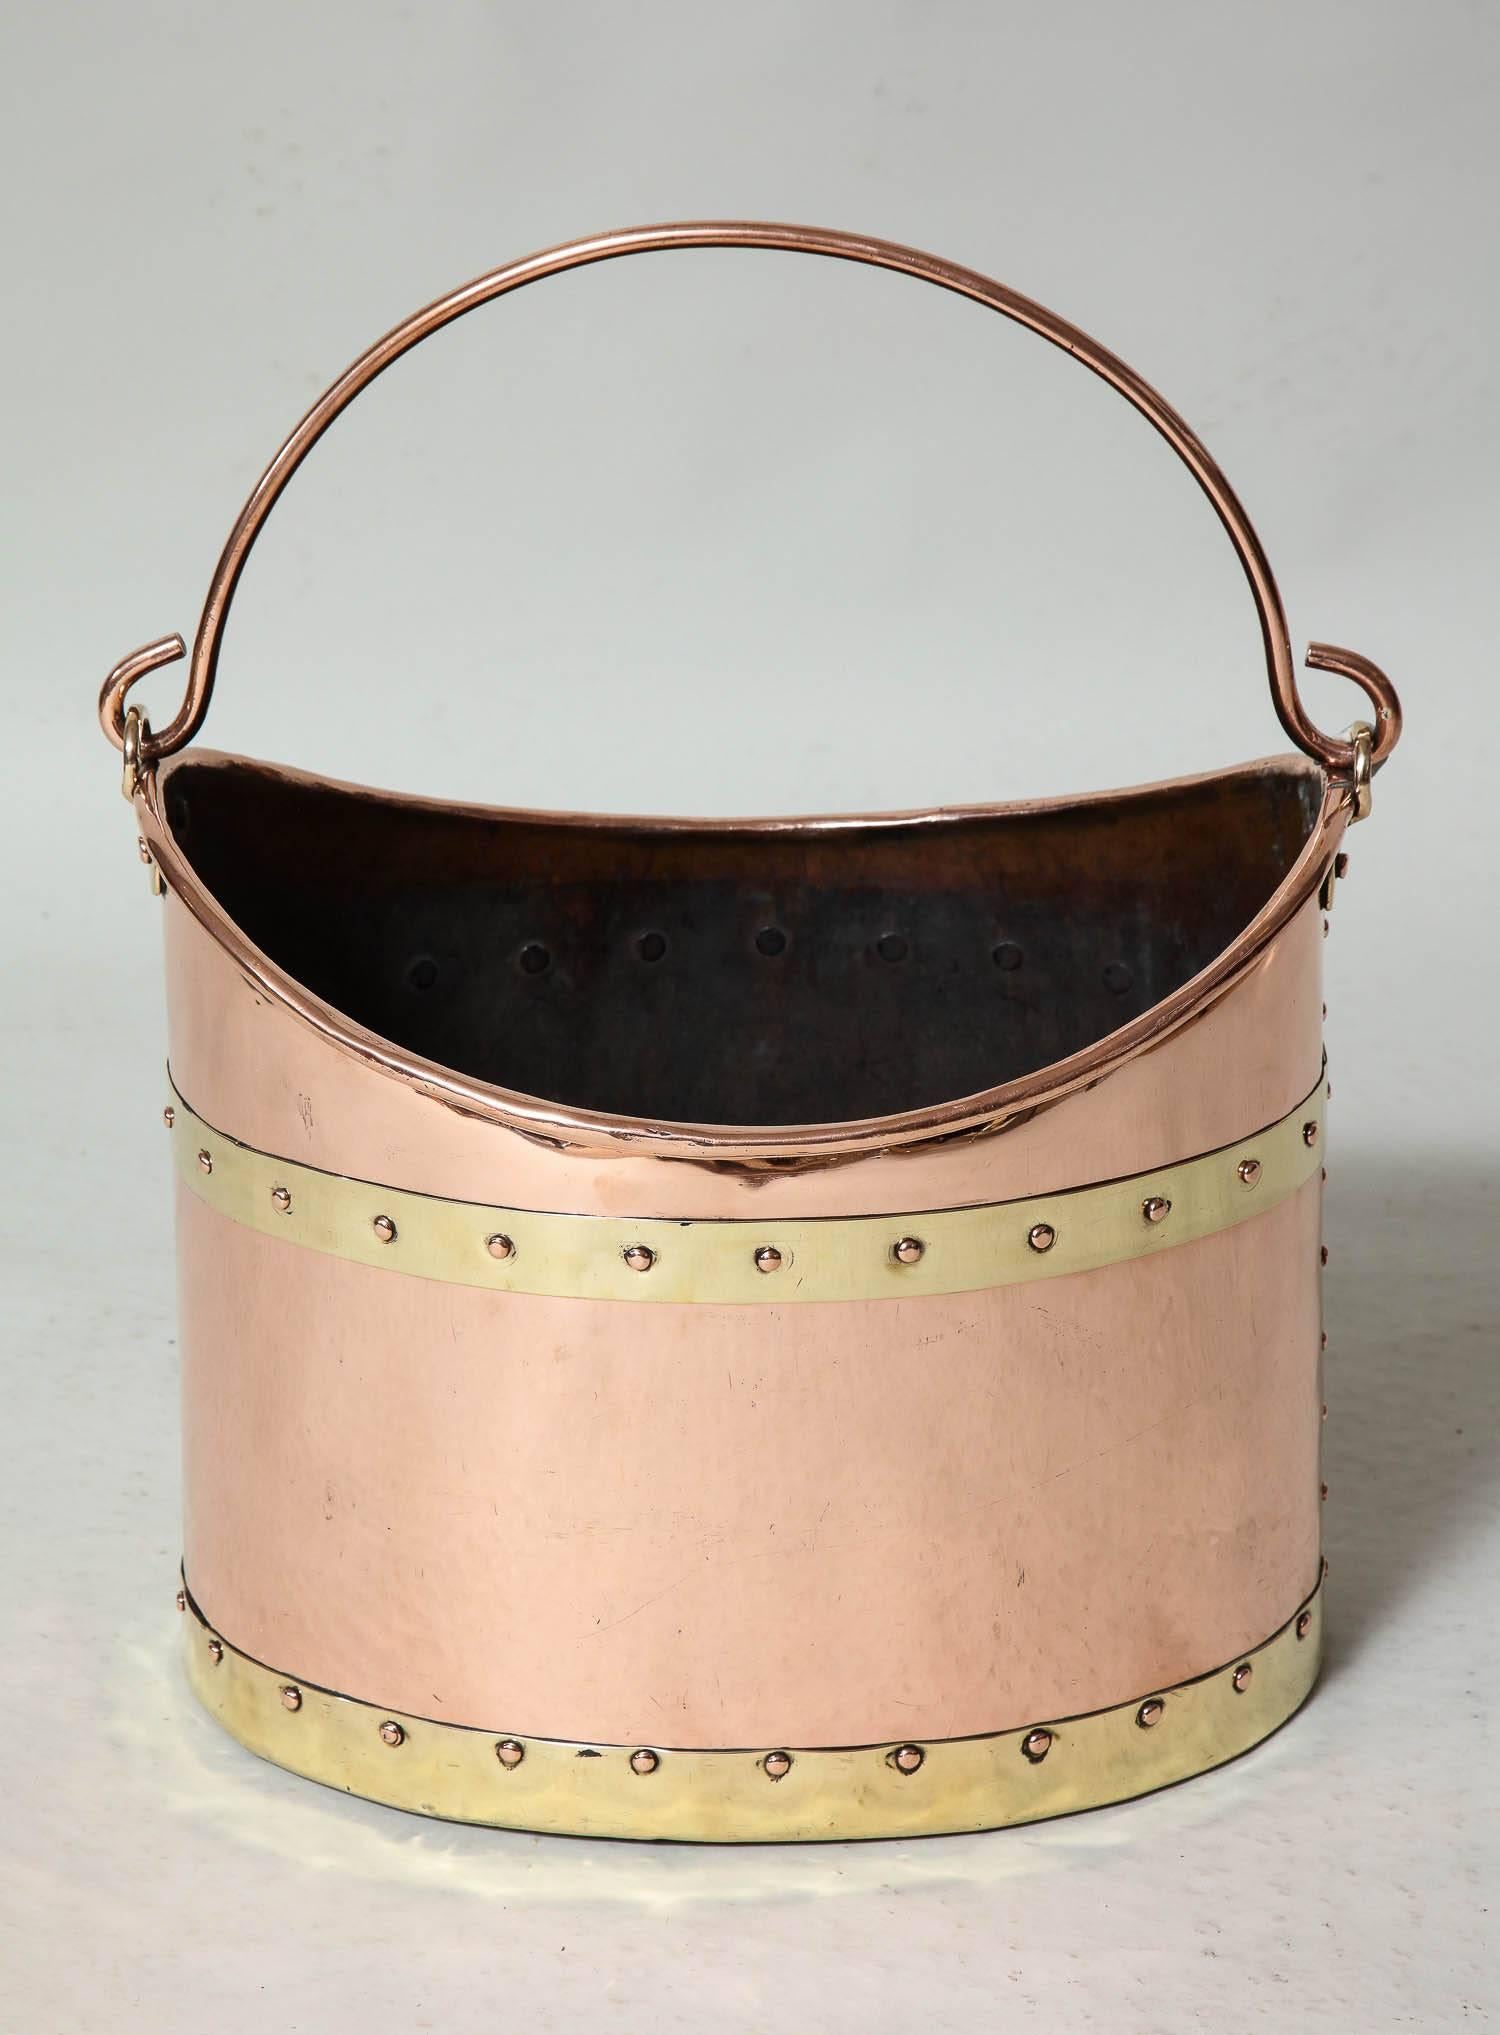 Fine English 19th century brass bound copper bucket having a bail handle, rolled lip, brass bands with studded copper riveted seams, the whole with well polished surface and of skilled craftsmanship.